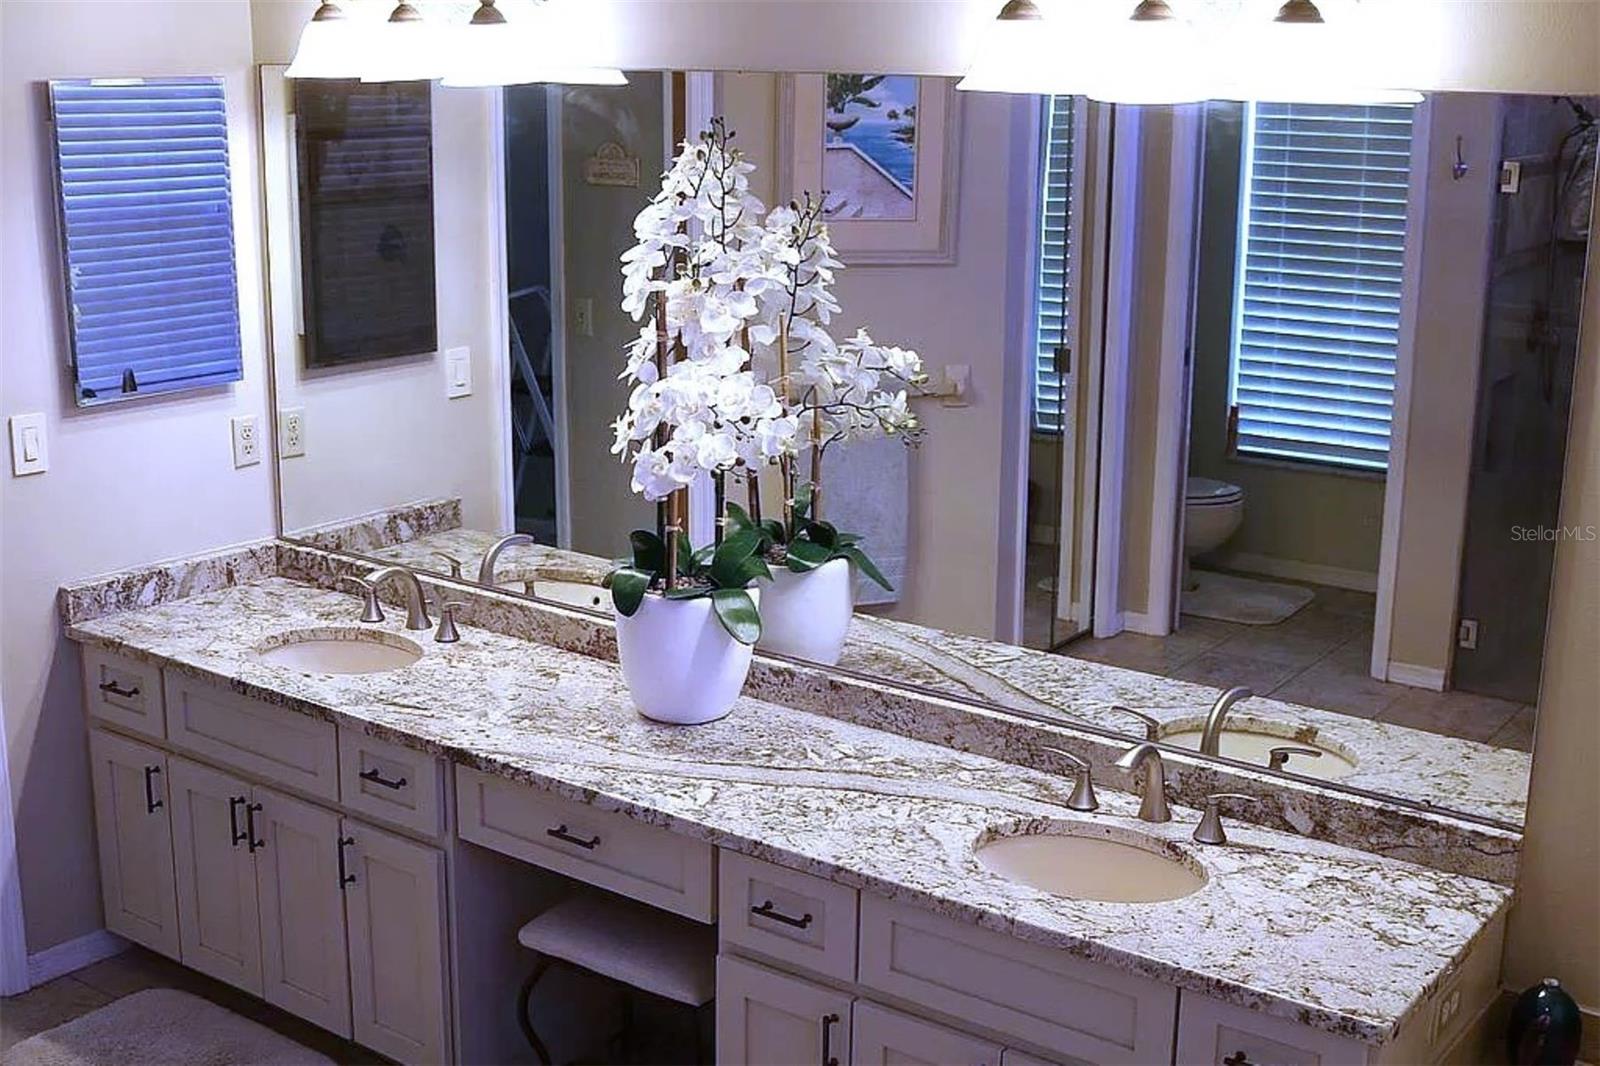 Enter this beautiful bathroom area, His and Her sinks with makeup area inbetween sinks